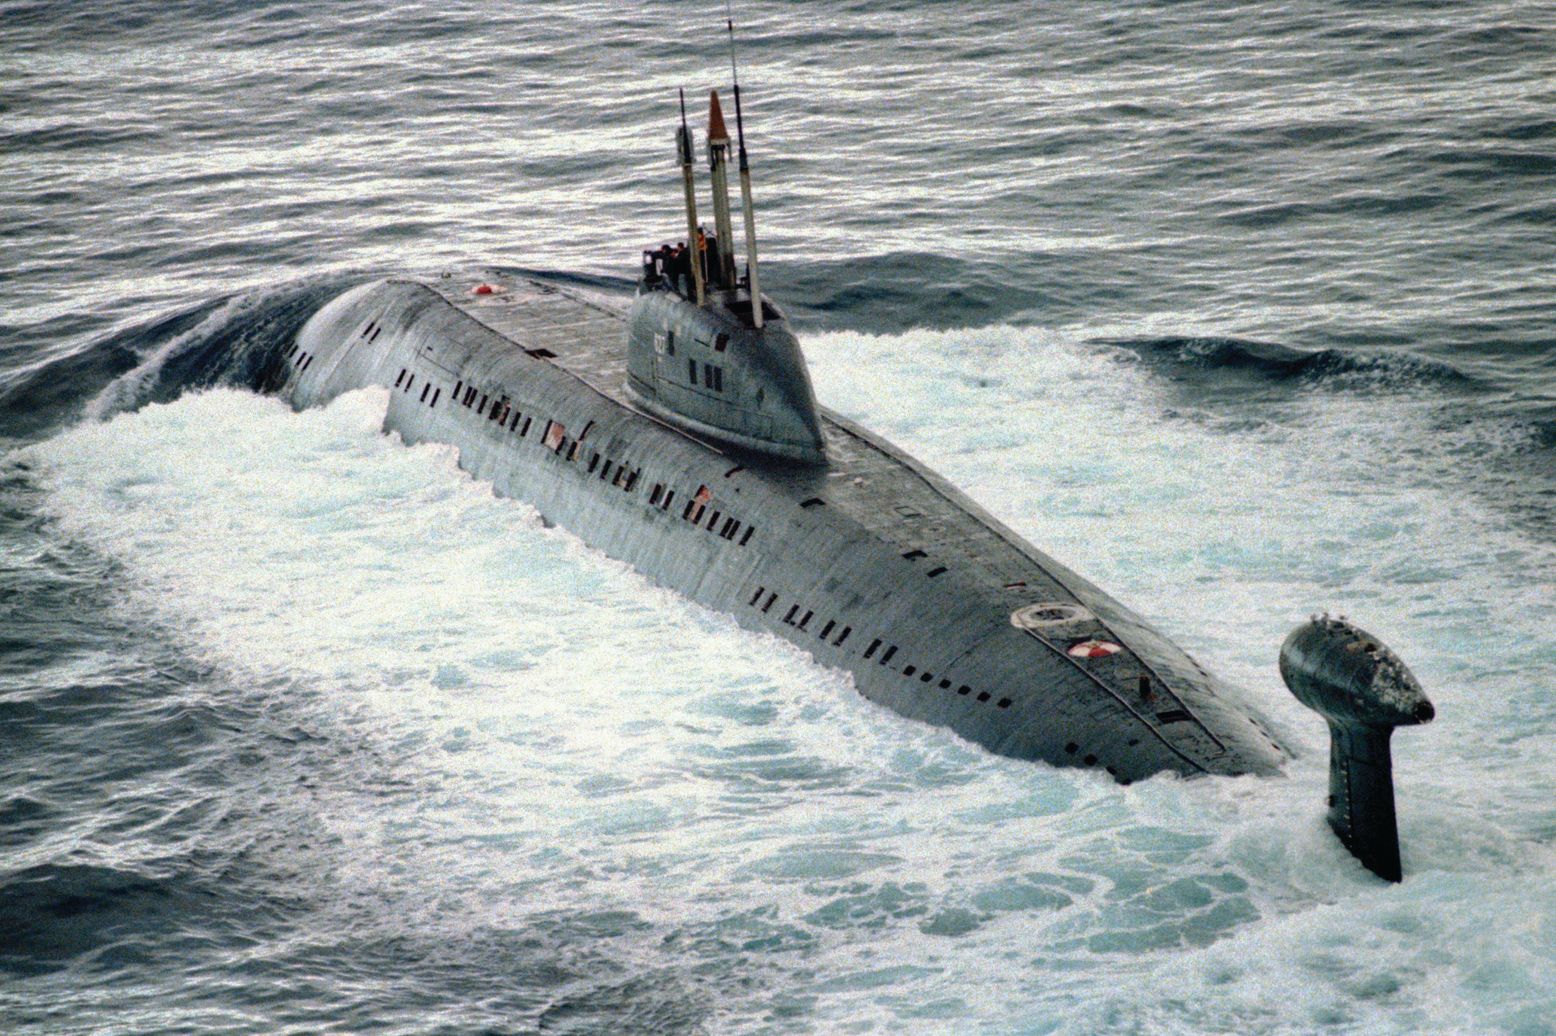 Soviet Victor II-class nuclear-powered submarine, photographed in 1994. During the Cold War, the United States and the Soviet Union engaged in a submarine-building arms race.